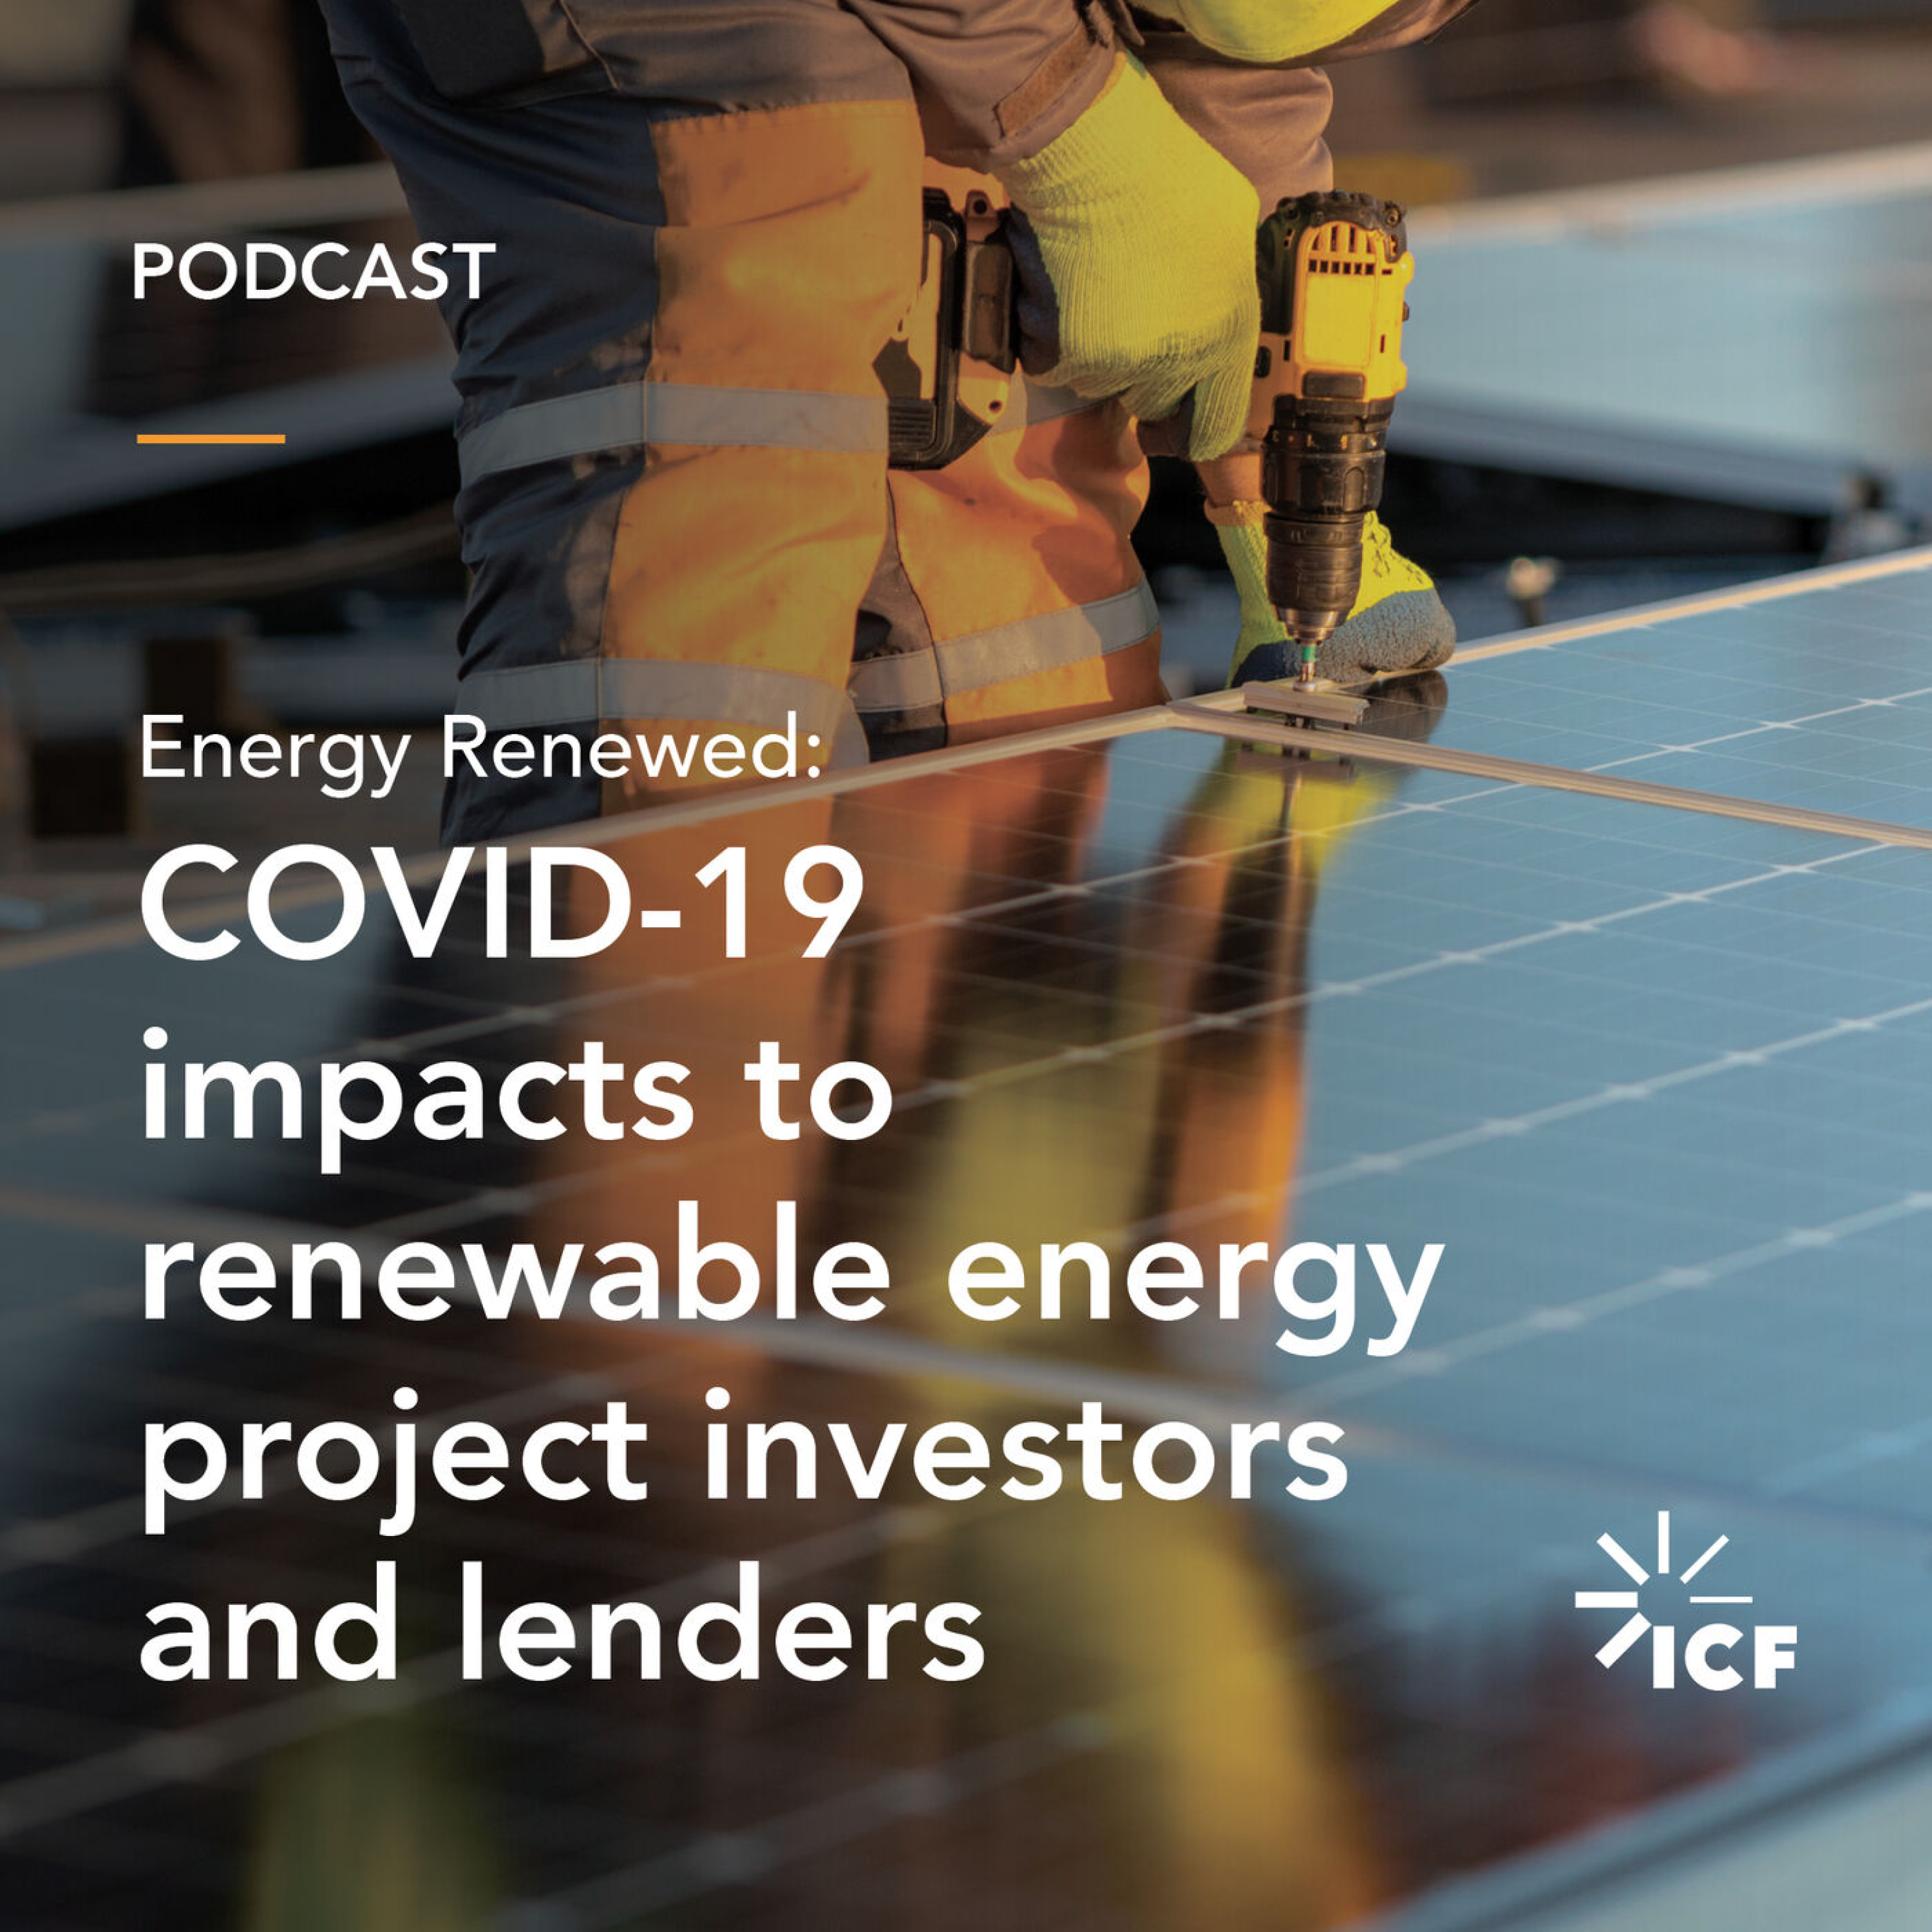 Energy Renewed #3: COVID-19 Impacts to Renewable Energy Projects - Part 2 Investors and Lenders